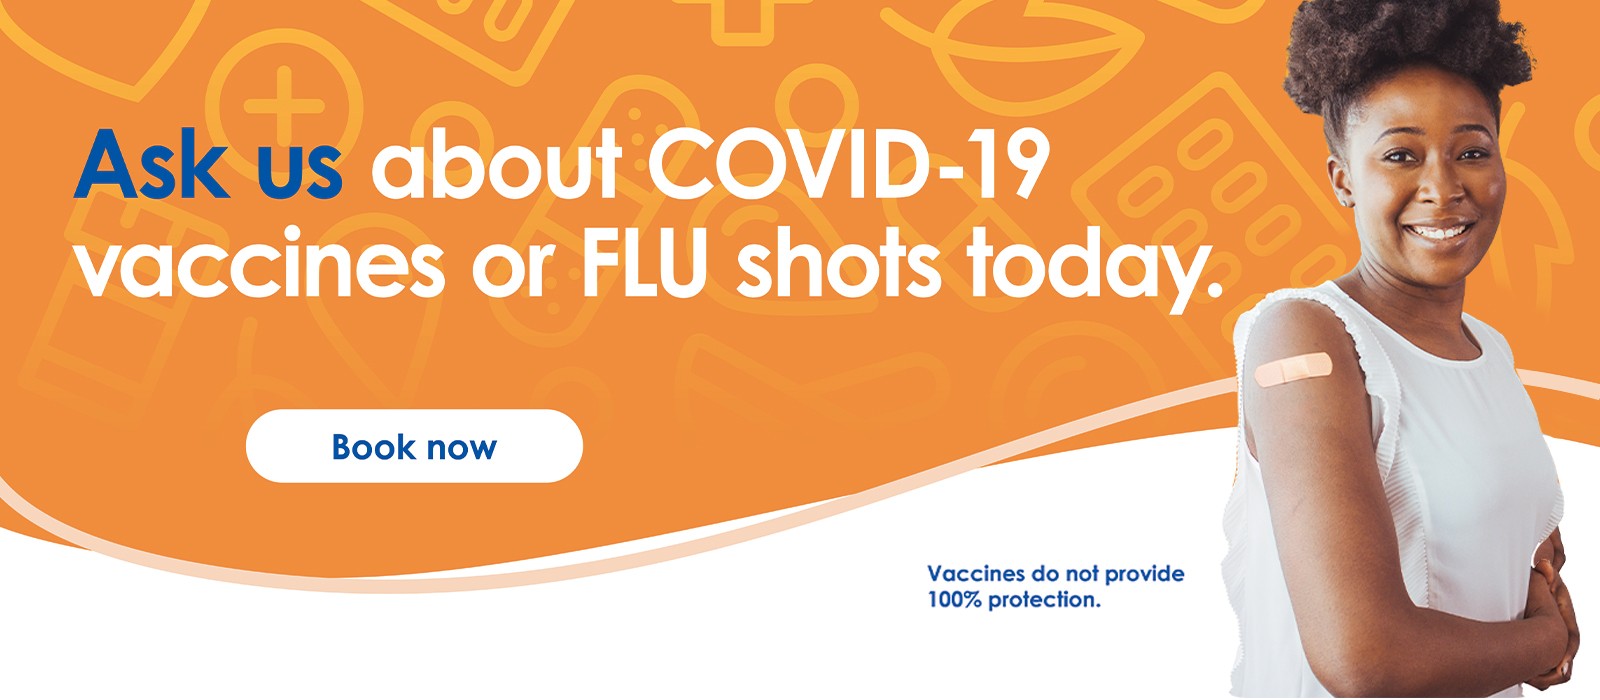 Text Reading 'Ask us about Covid-19 vaccines or flu shots today. Click on 'Book now' button given below.'